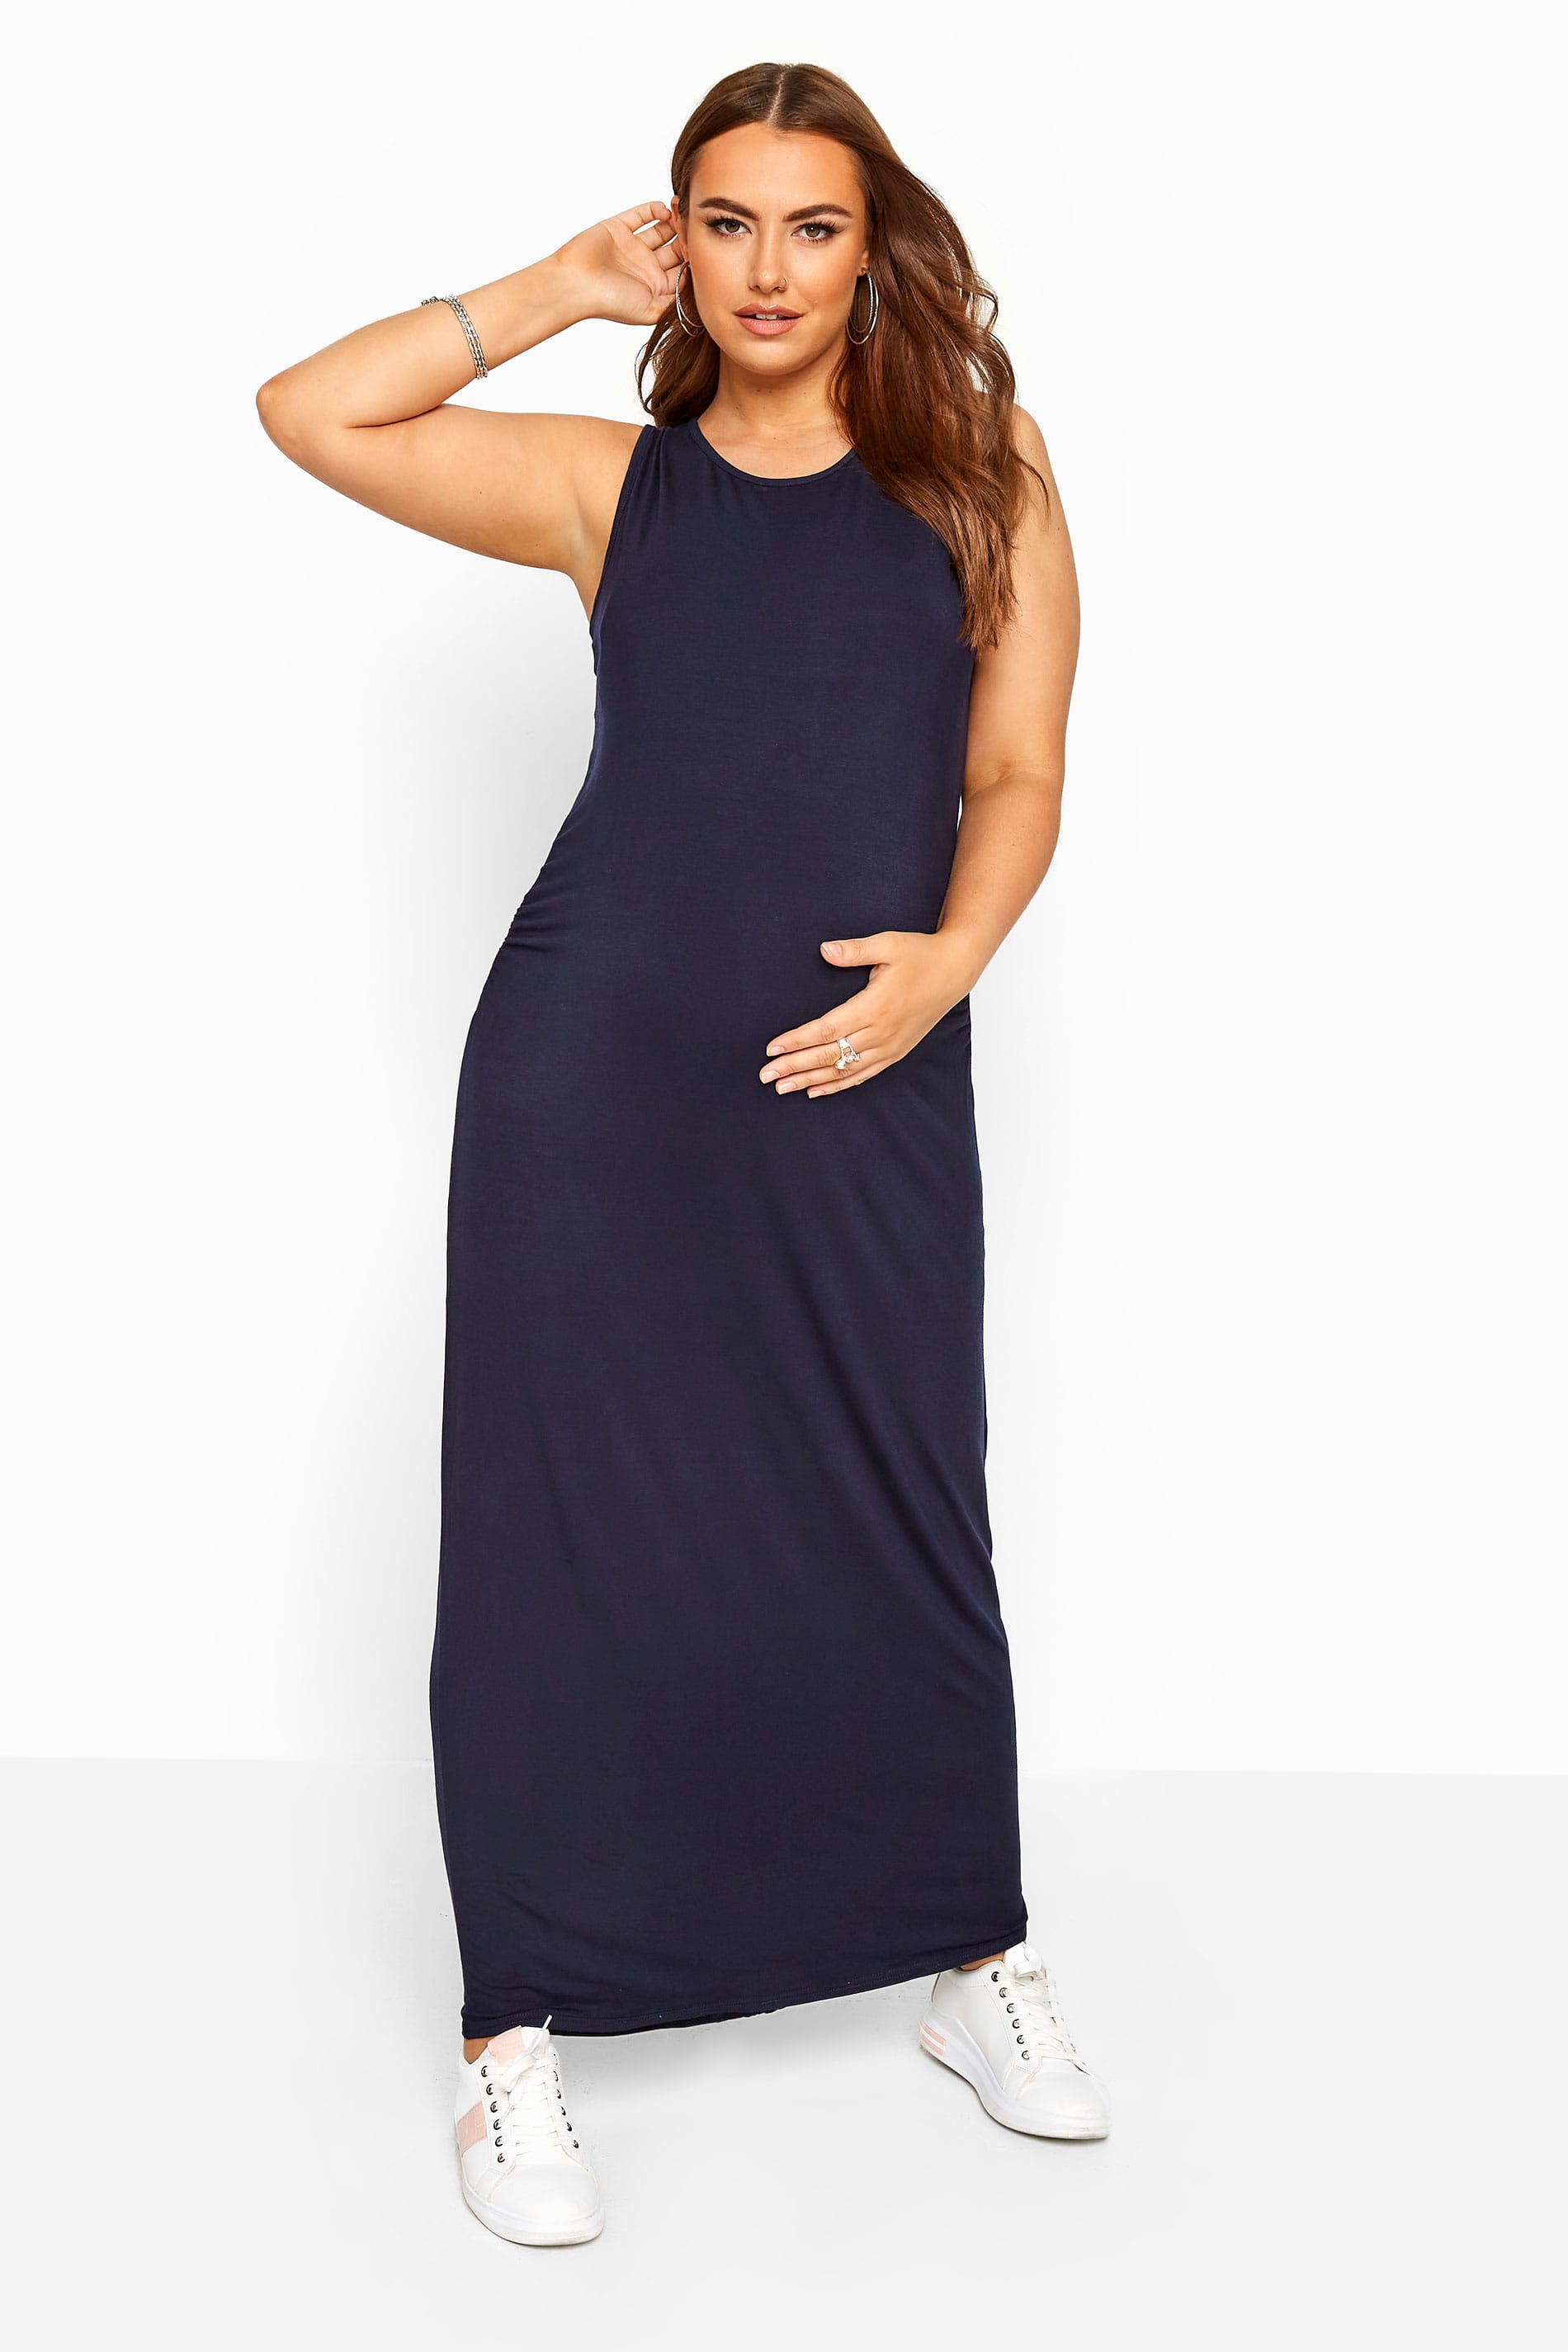 Yours Clothing Bump it up maternity navy maxi dress